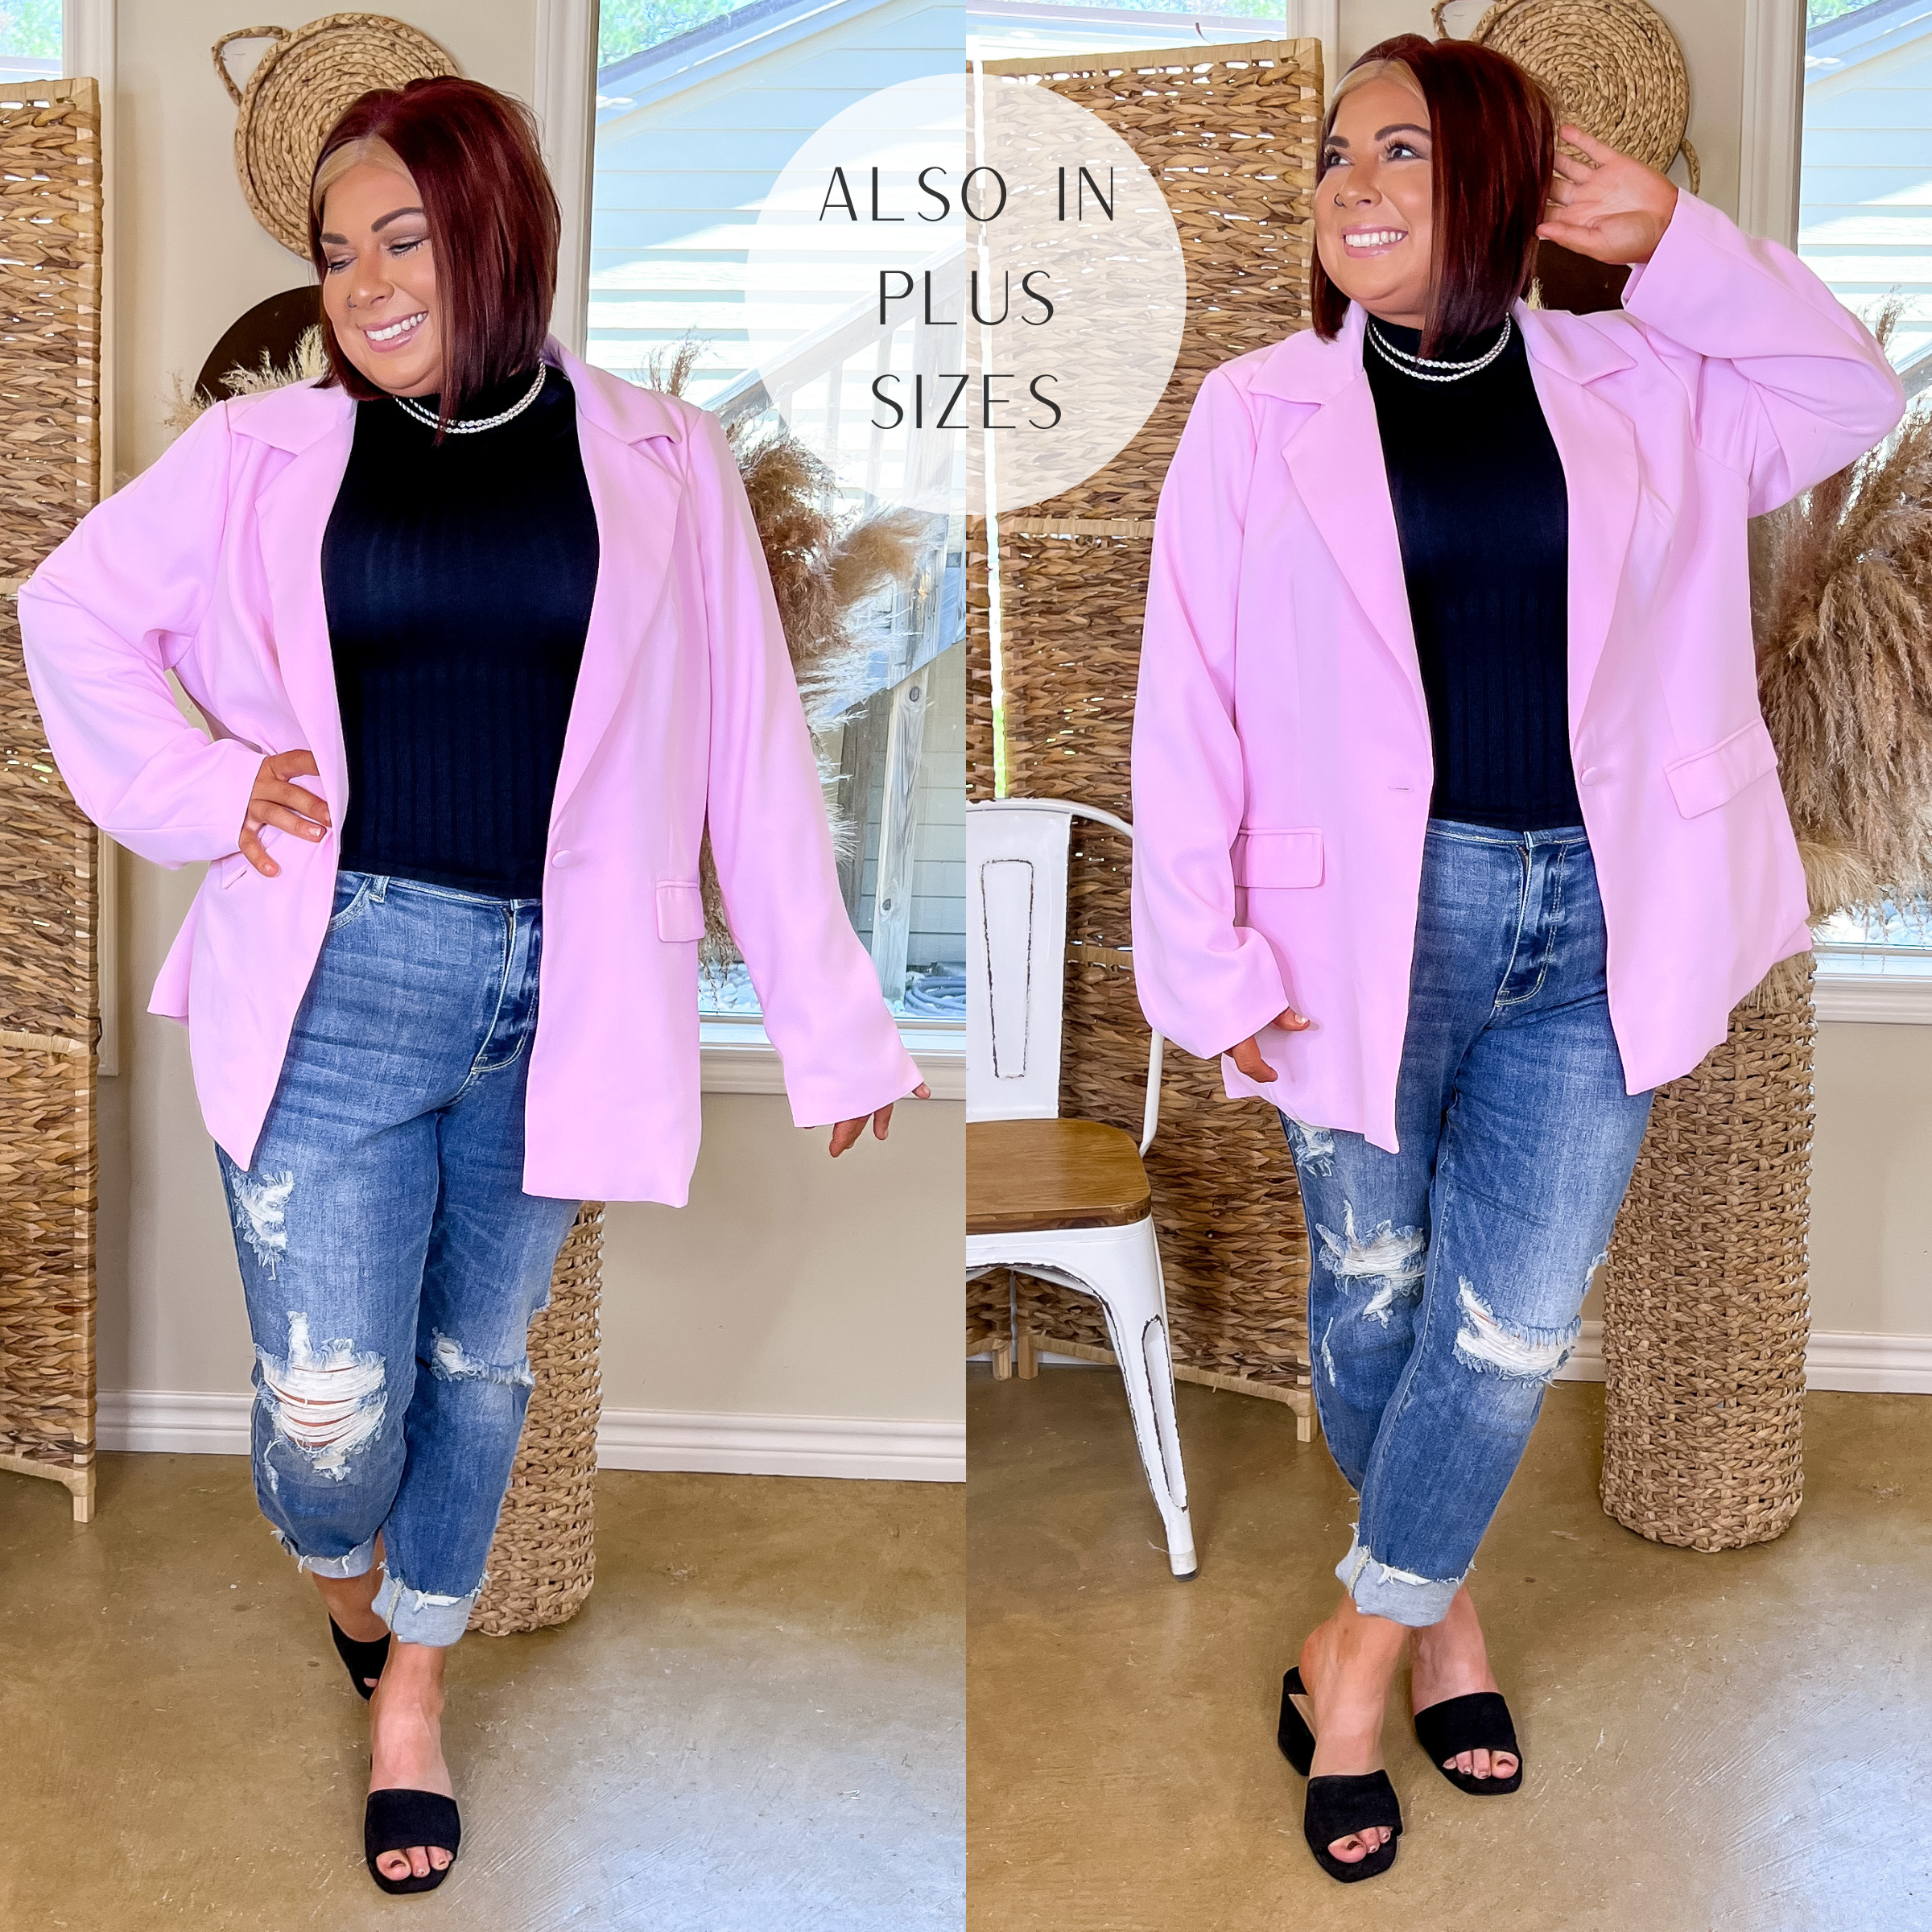 Model is wearing a light pink blazer with long sleeves, pockets, and a collared neckline. Model has it on over a black turtle neck top, distressed jeans, black heels, and silver jewelry.